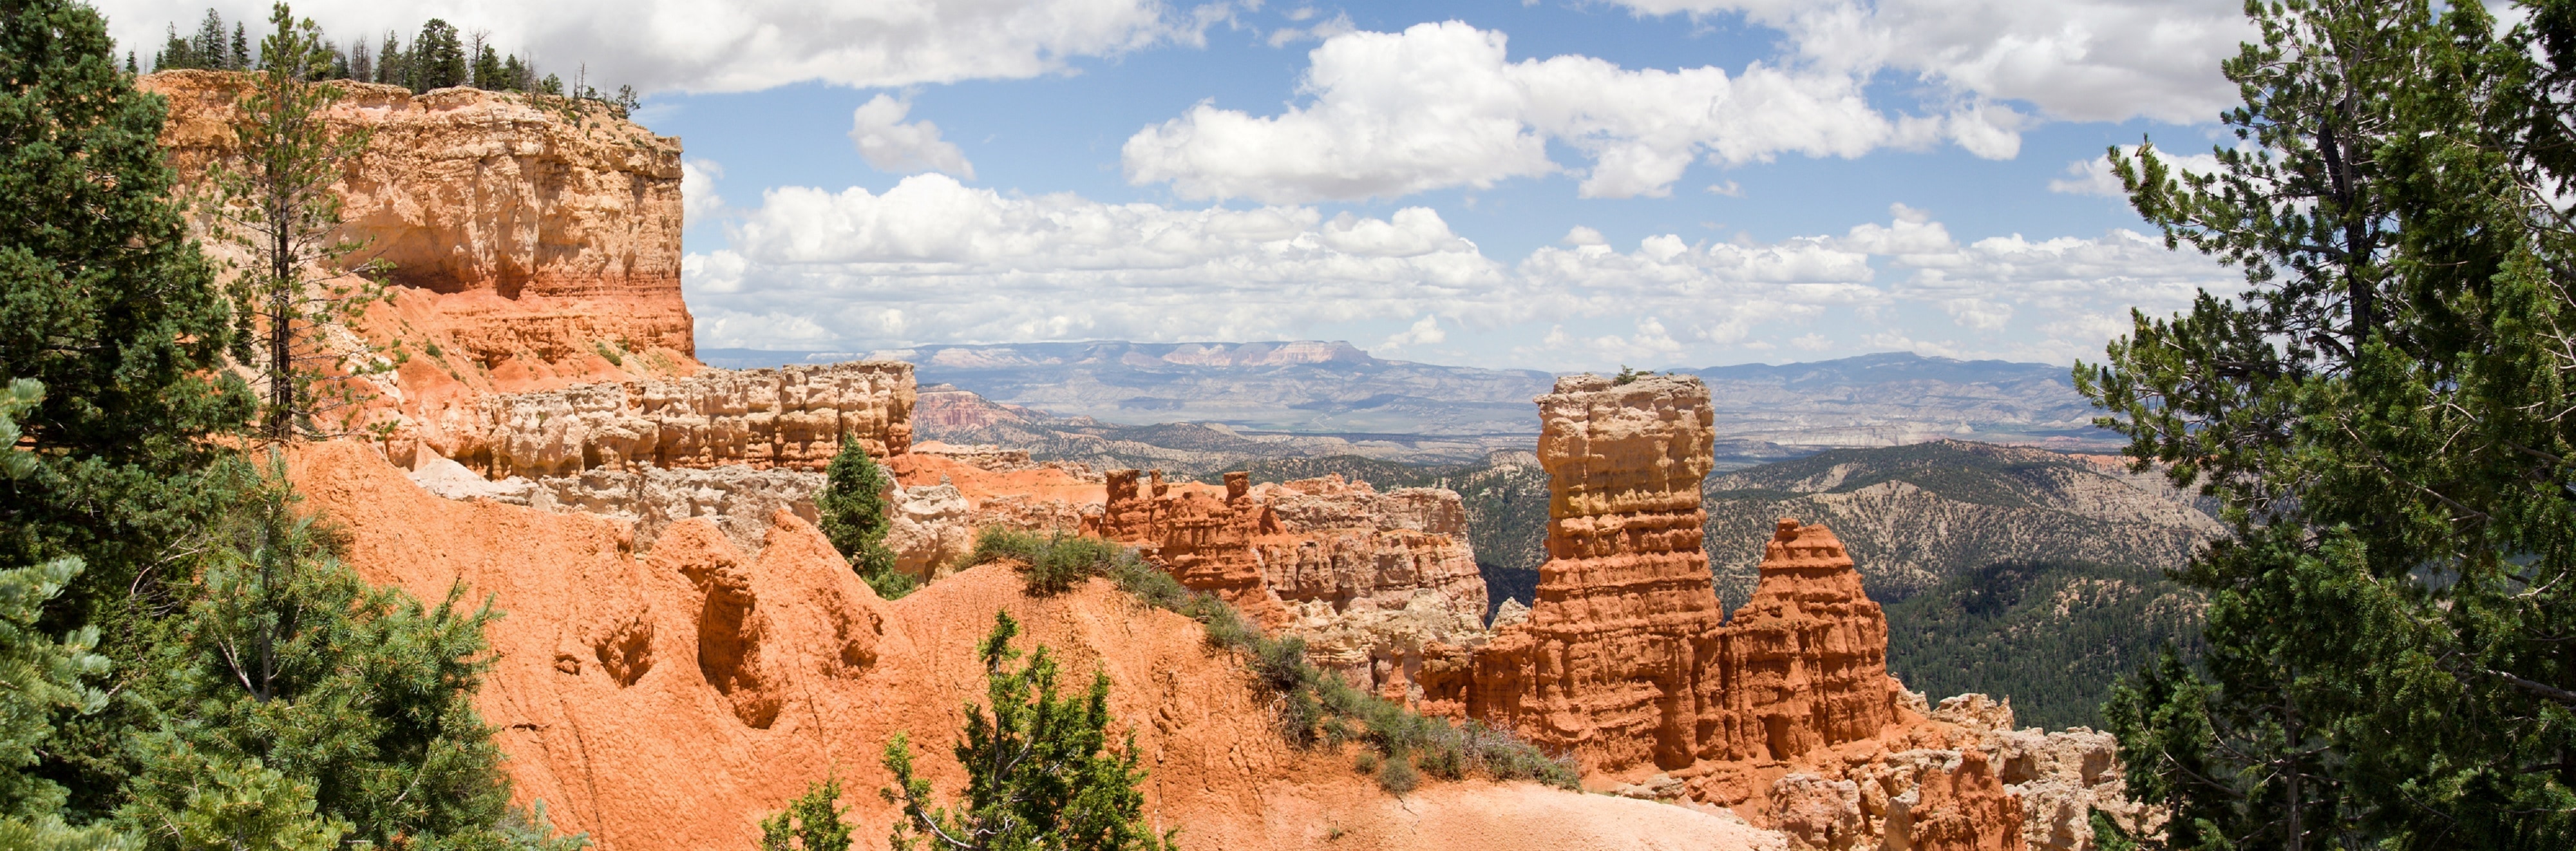 Landscape, Geology, Bryce Canyon, Scenic, travel destinations, day